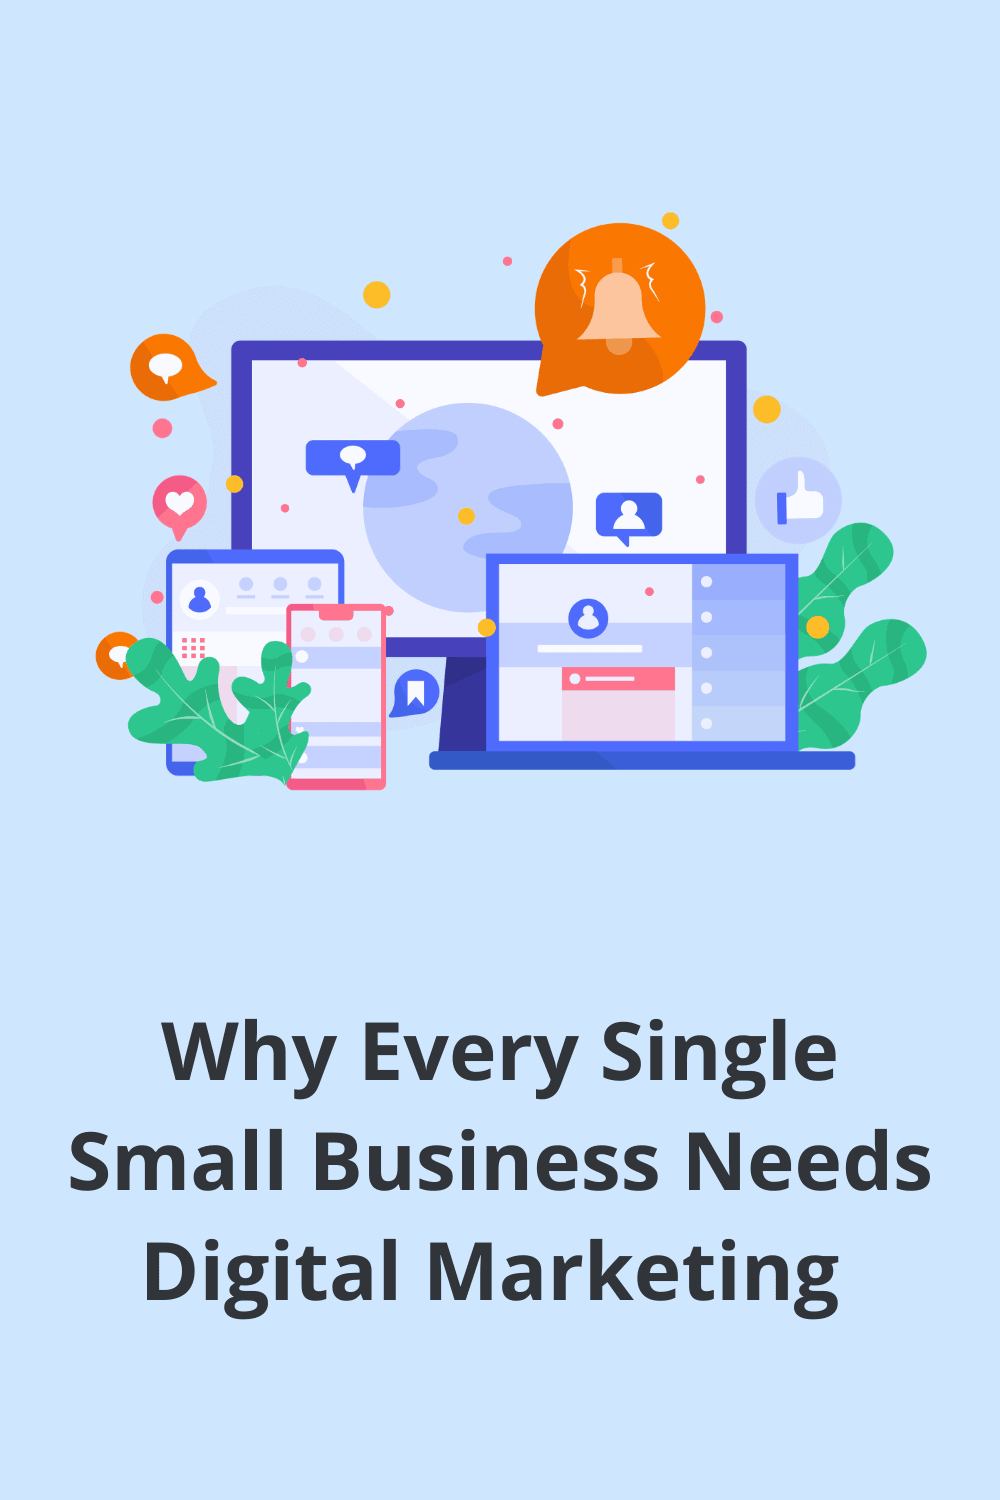 Let’s talk about why every small business – including yours – needs digital marketing, and which marketing strategies we recommend. via @scopedesign